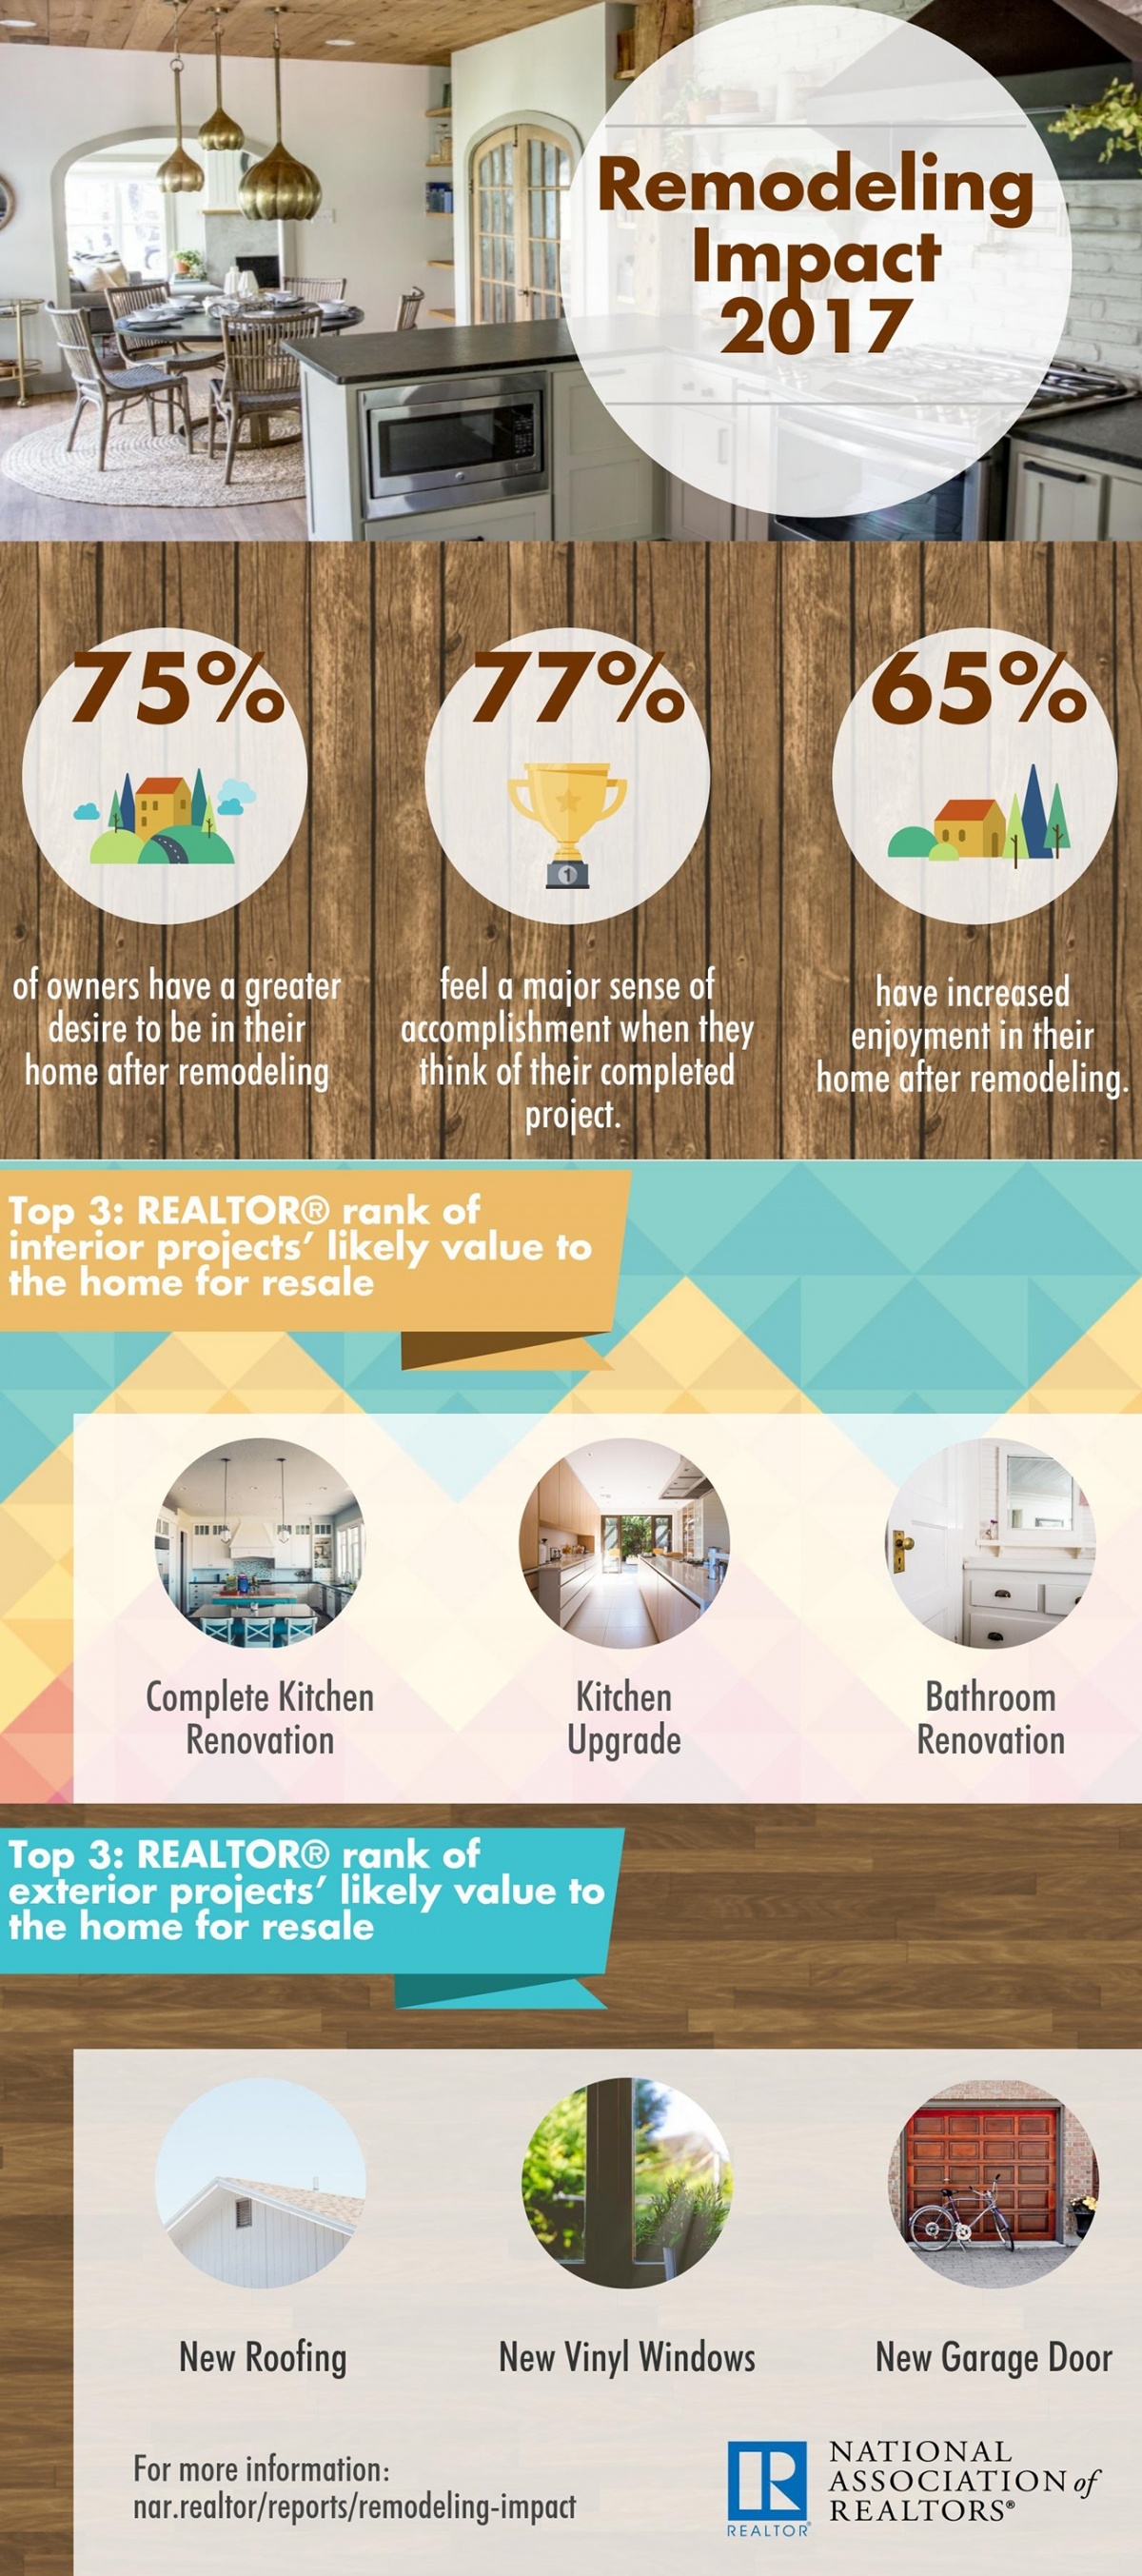 2017 Remodeling Impact Infographic 09 28 2017 1300w 2932h.jpg